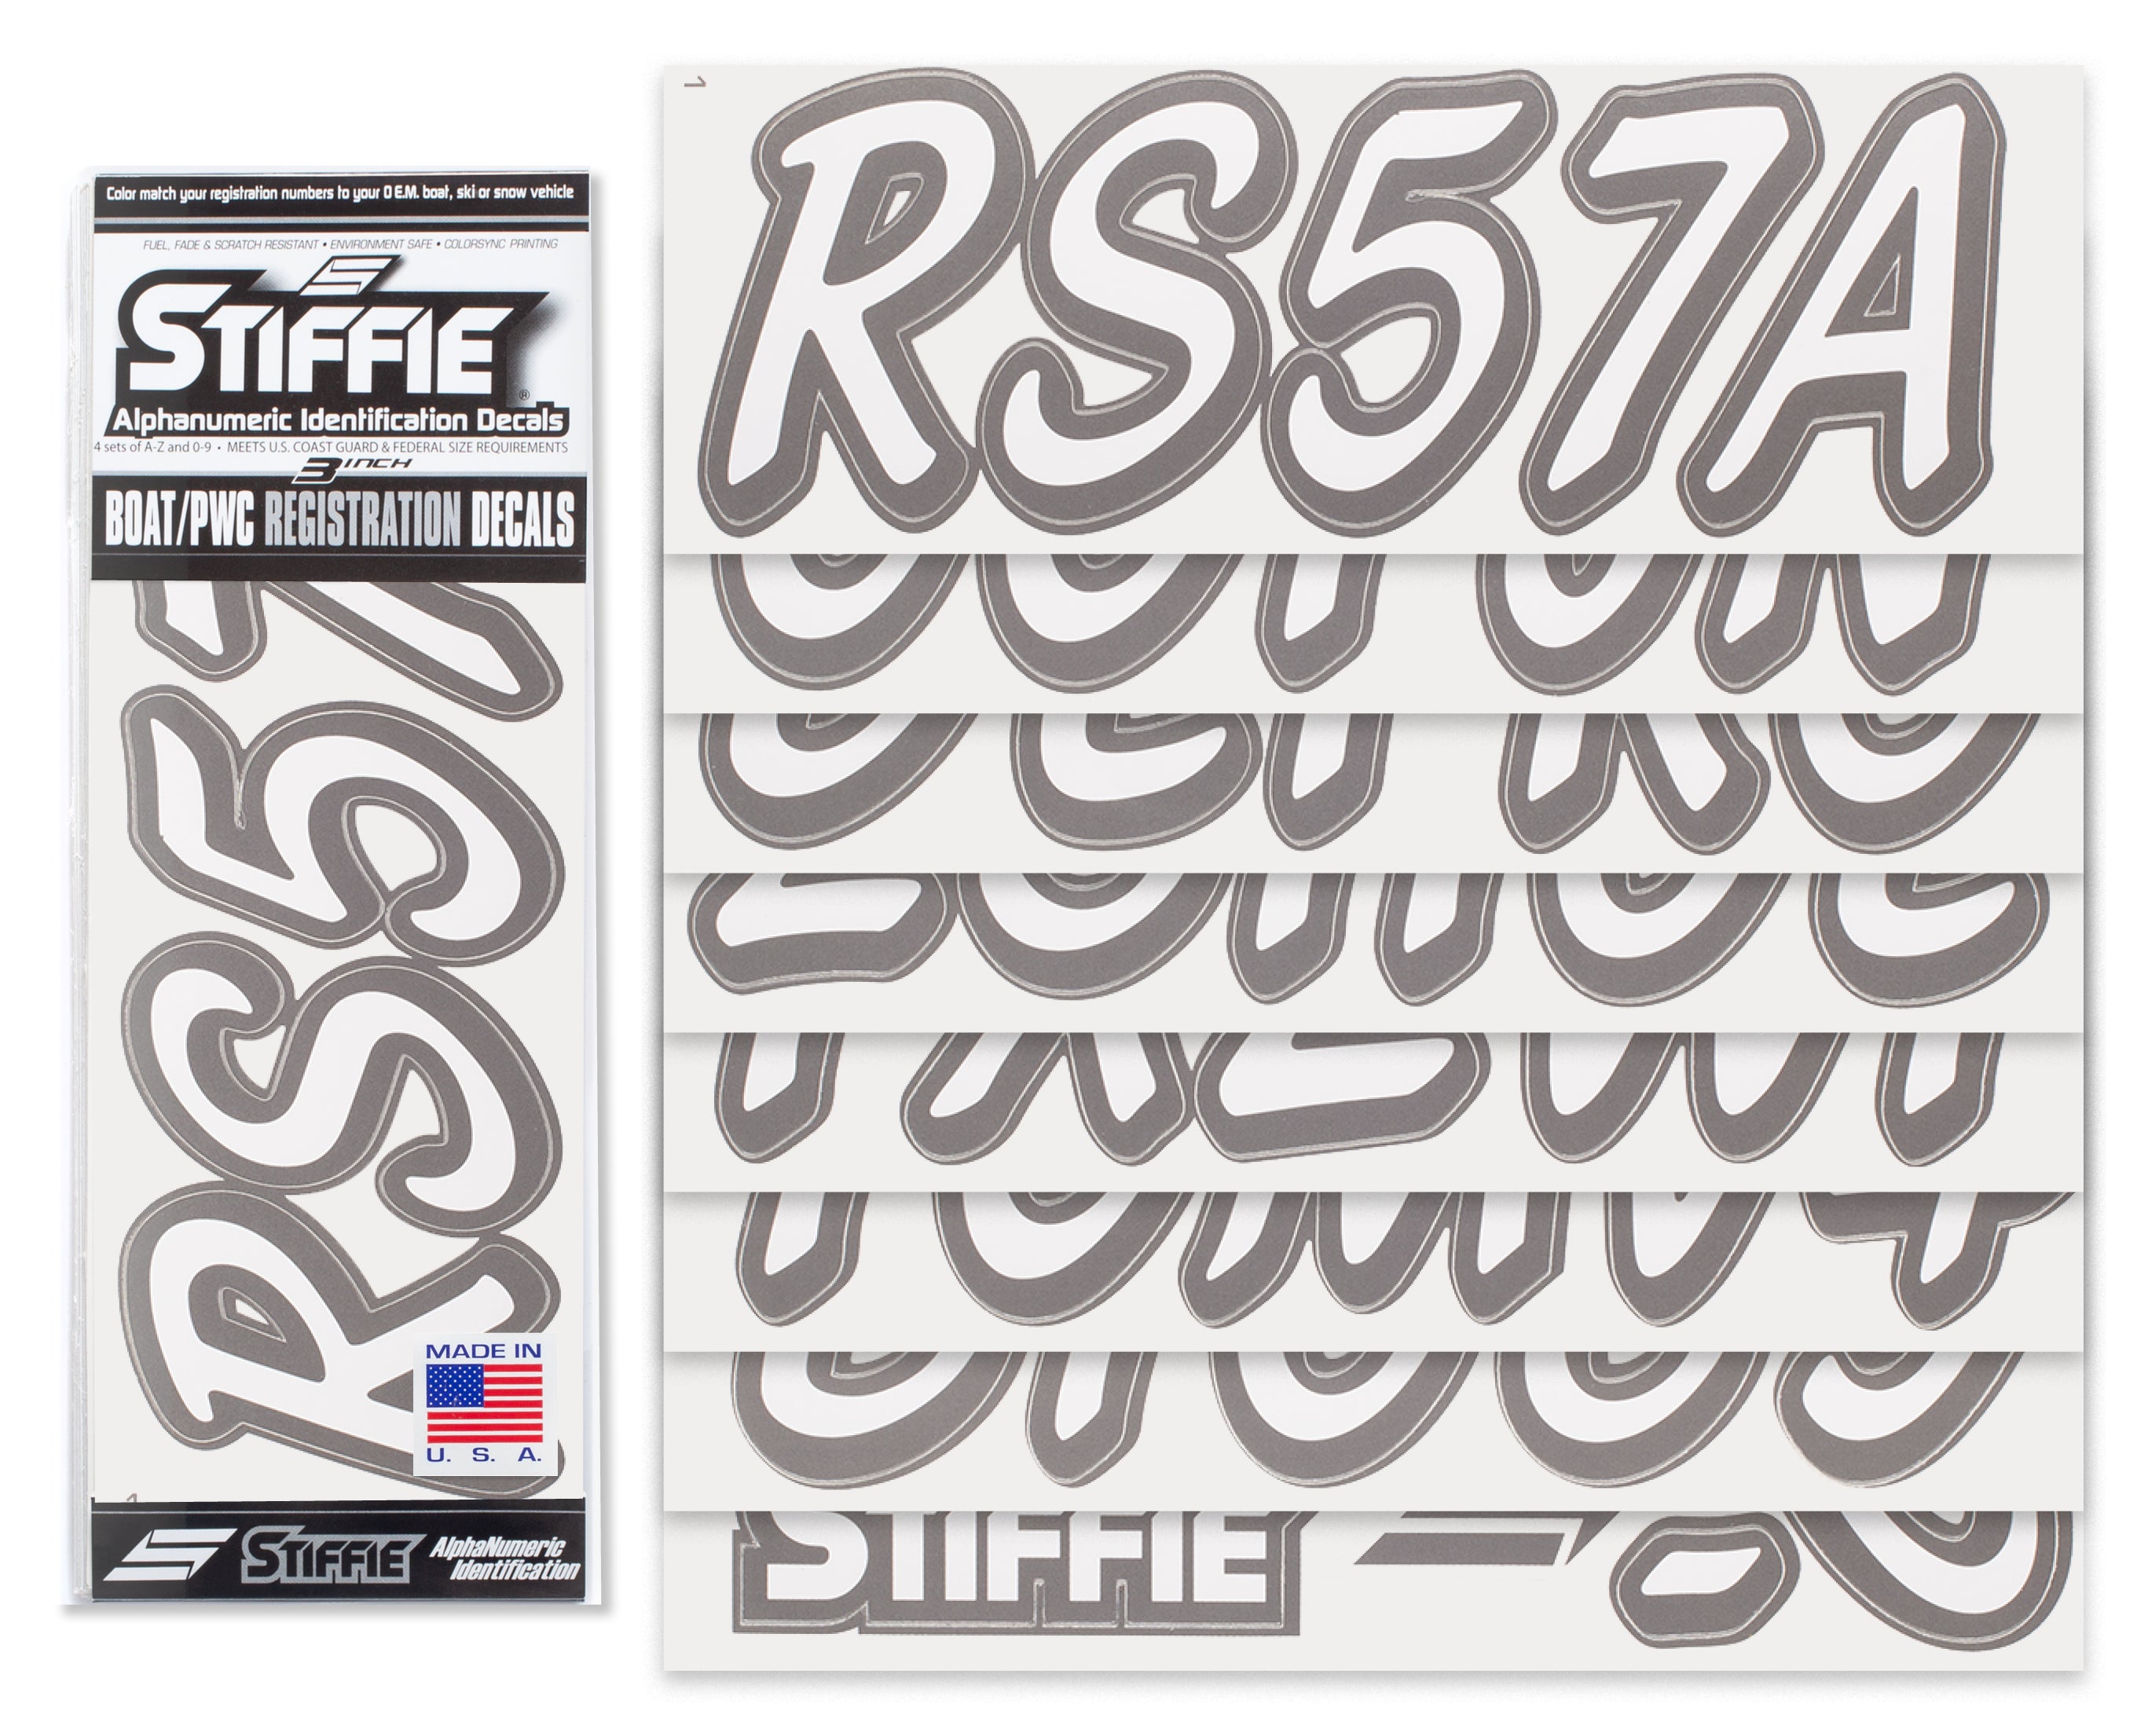 STIFFIE Whipline Solid White/Carbon 3" Alpha-Numeric Registration Identification Numbers Stickers Decals for Boats & Personal Watercraft